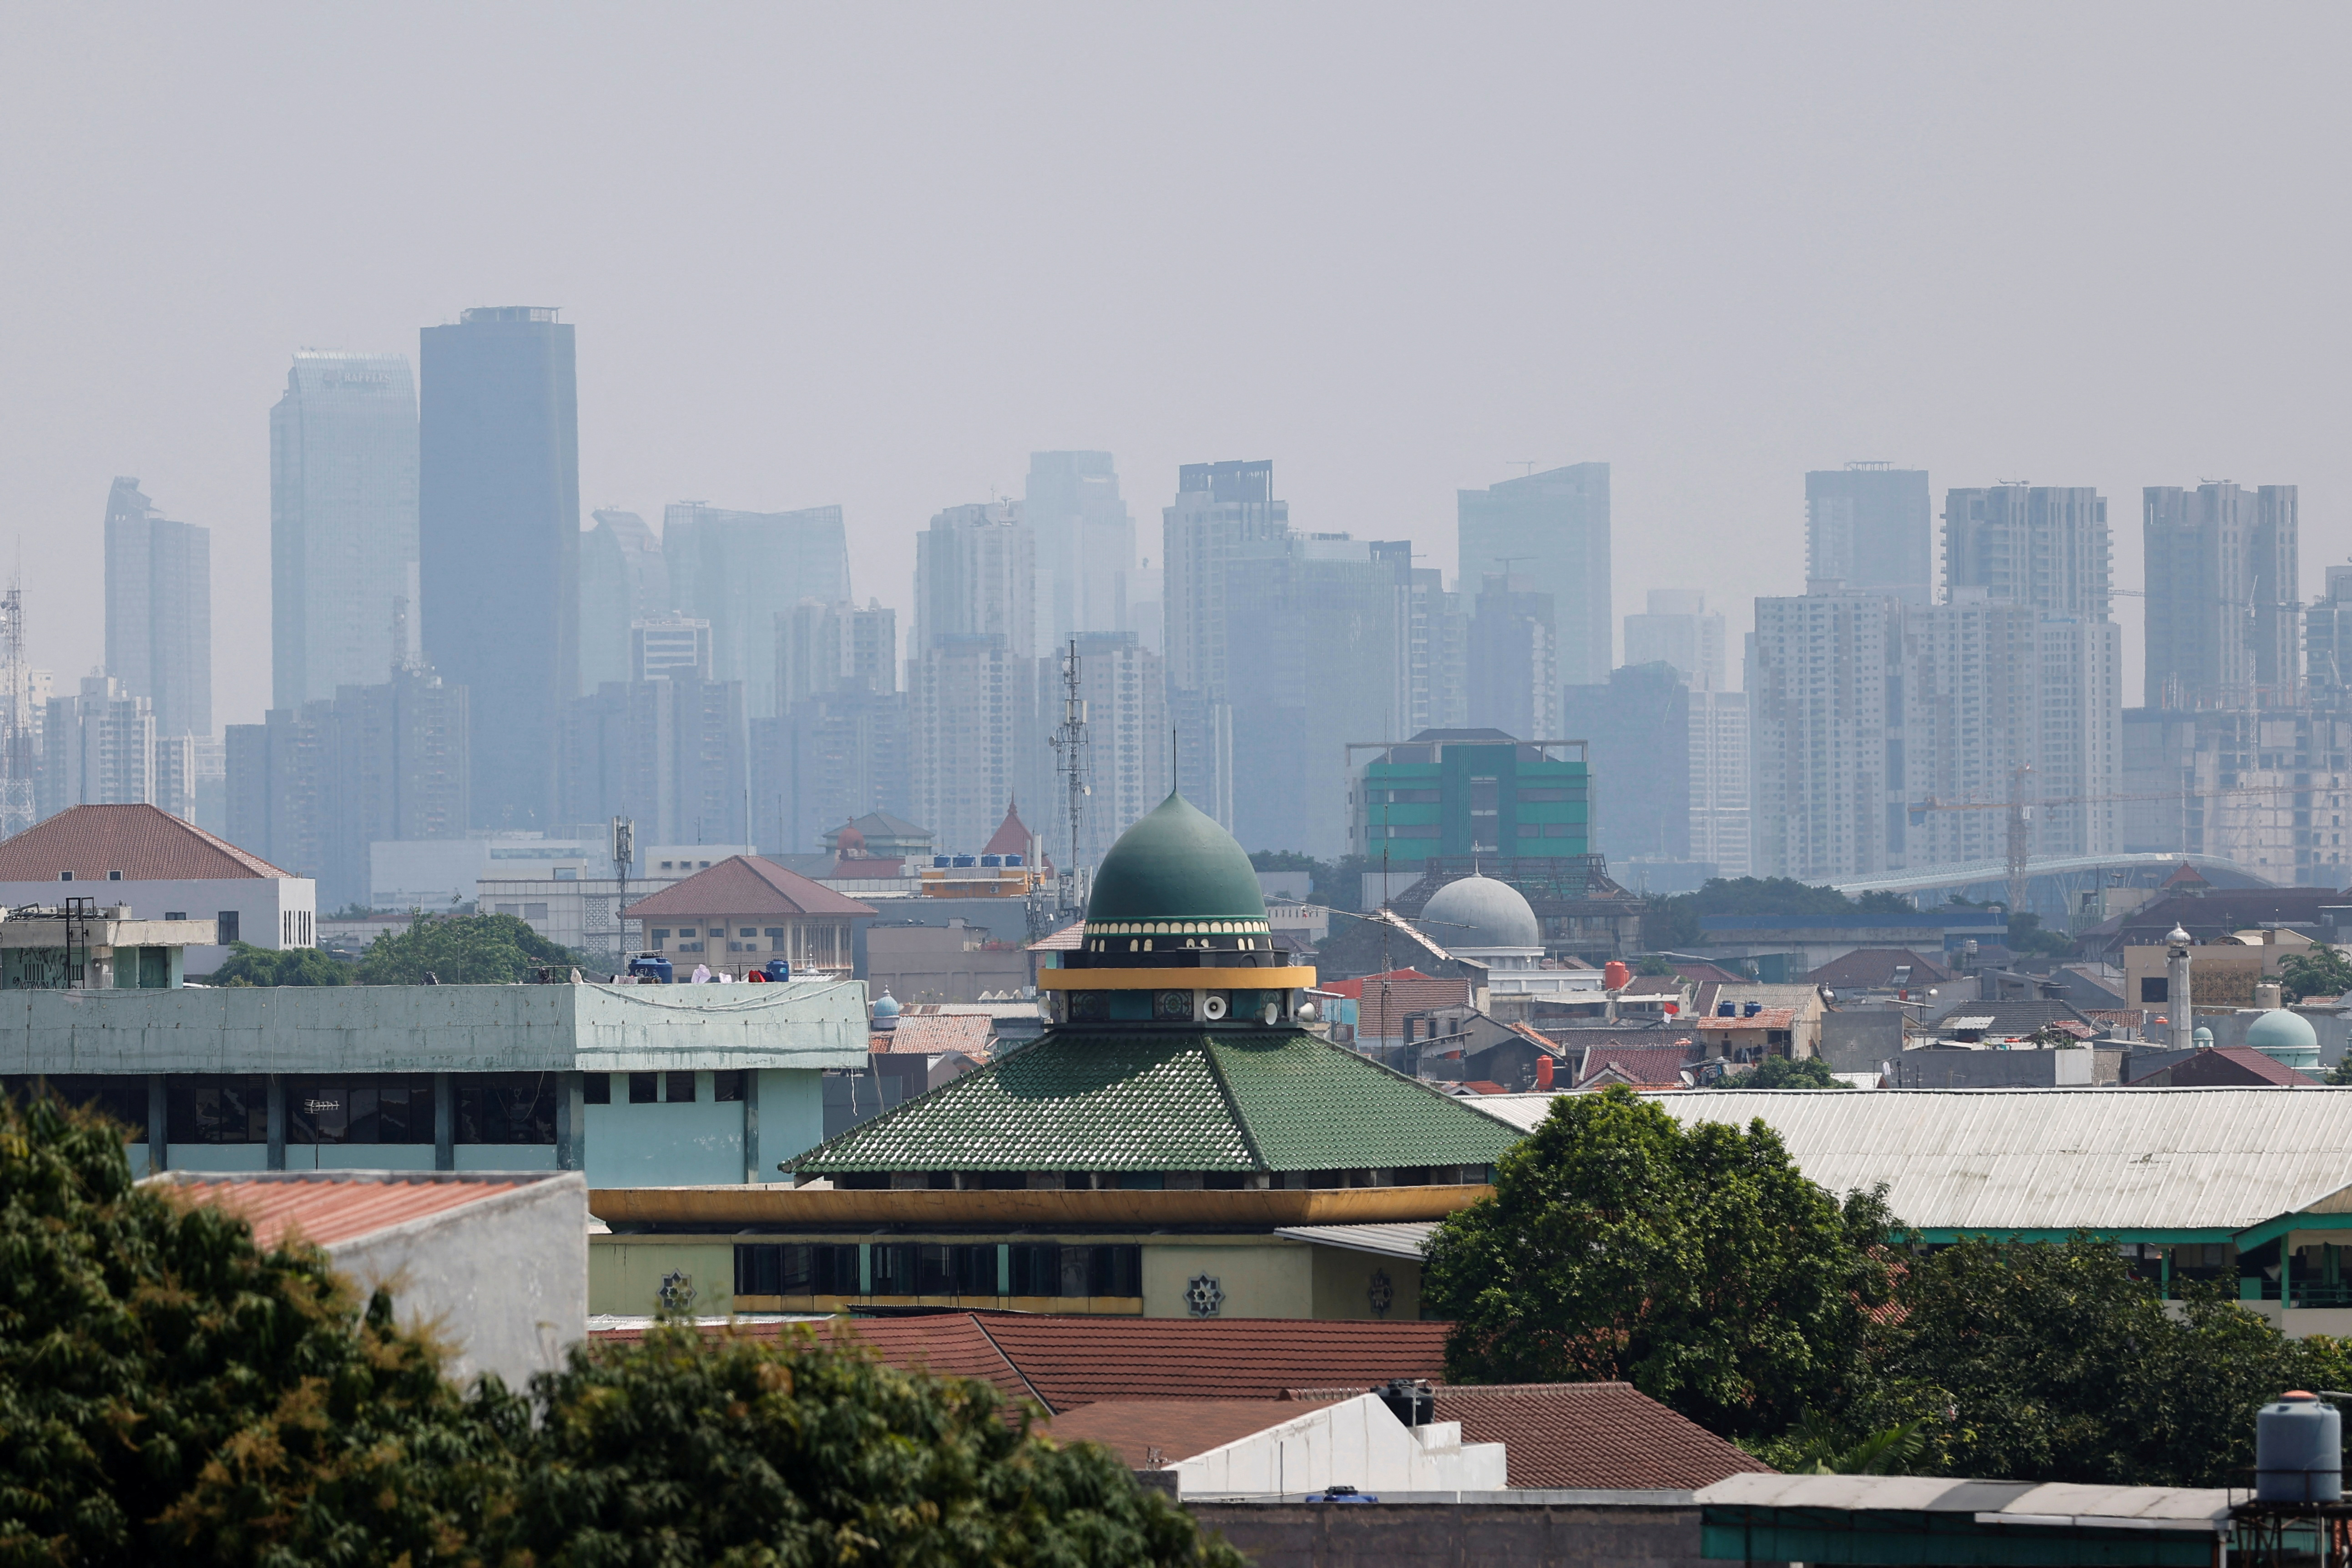 Jakarta named world's most polluted city